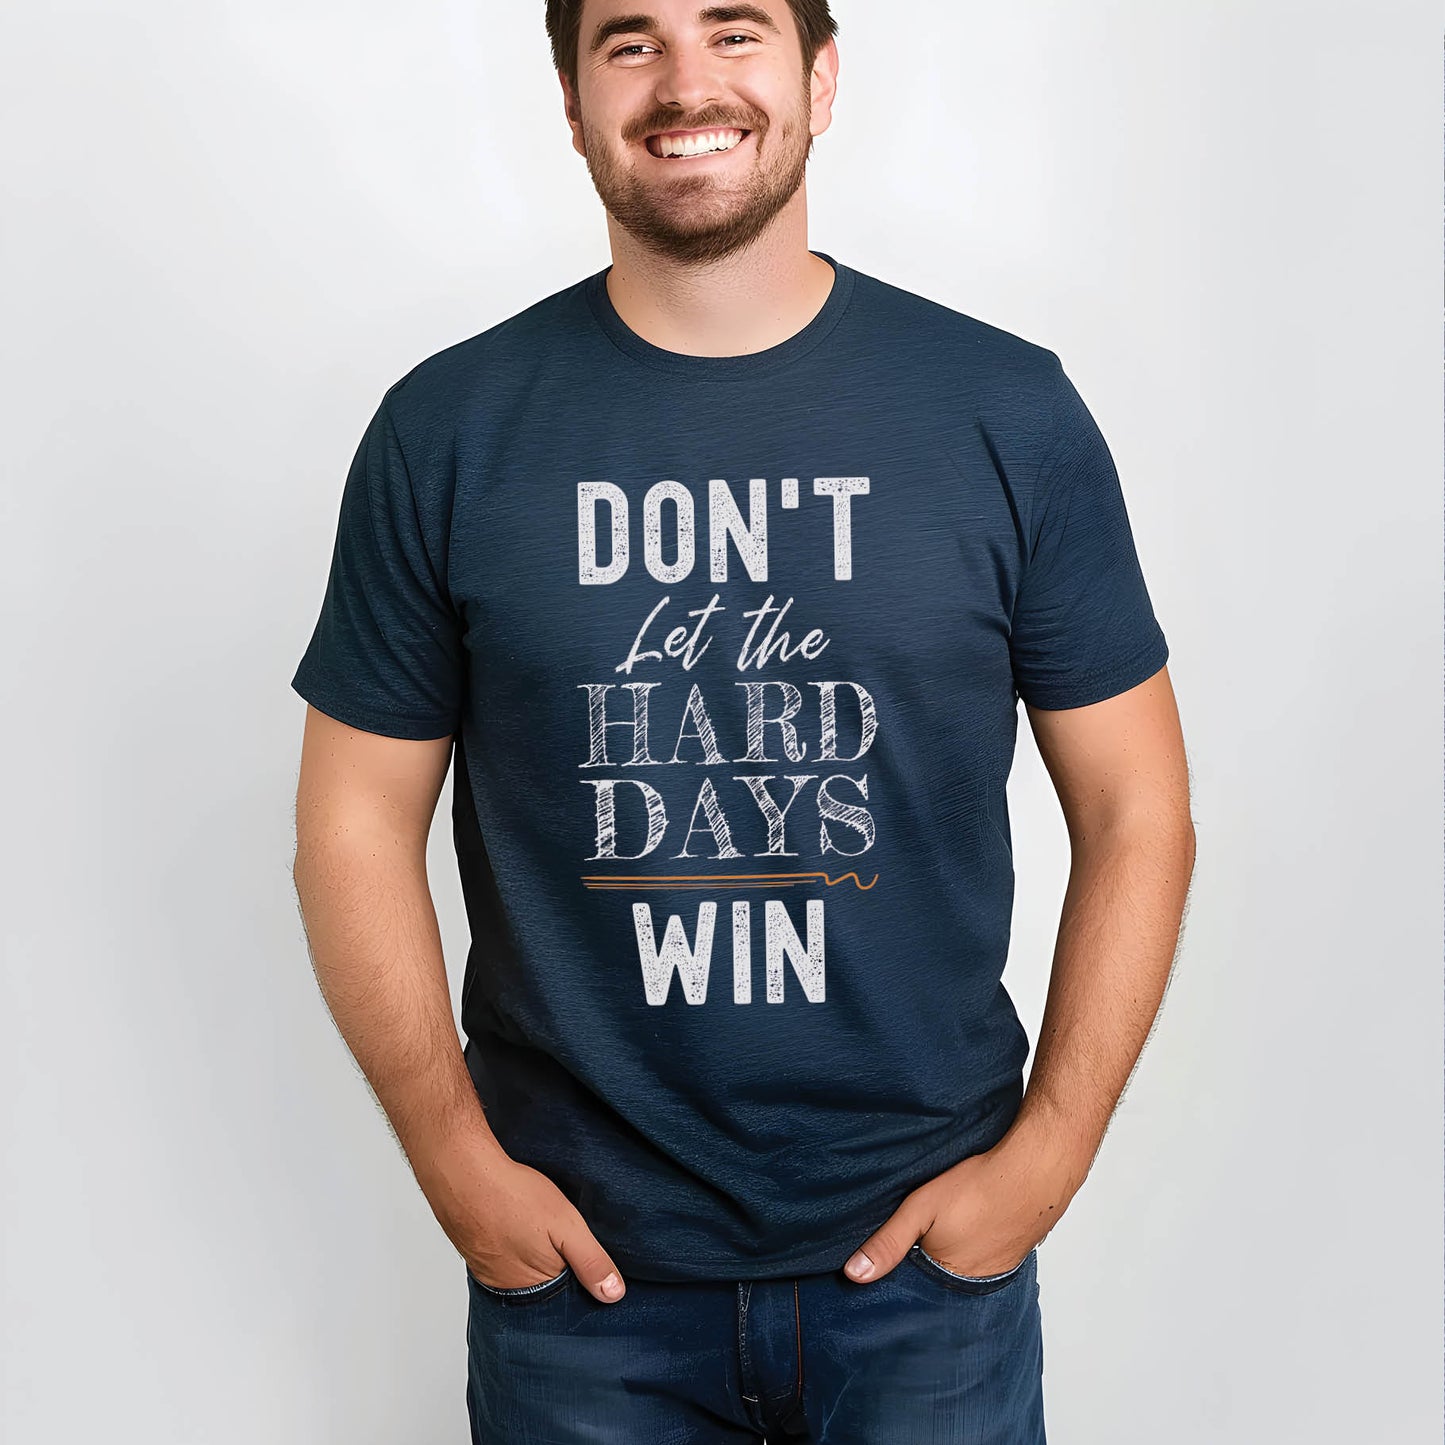 Young man, husband, dad wearing a faith-based "Don't Let the Hard Days Win" Christian men's soft navy blue unisex t-shirt with bold typography design printed in white, great father's day gift for the encourager in your life